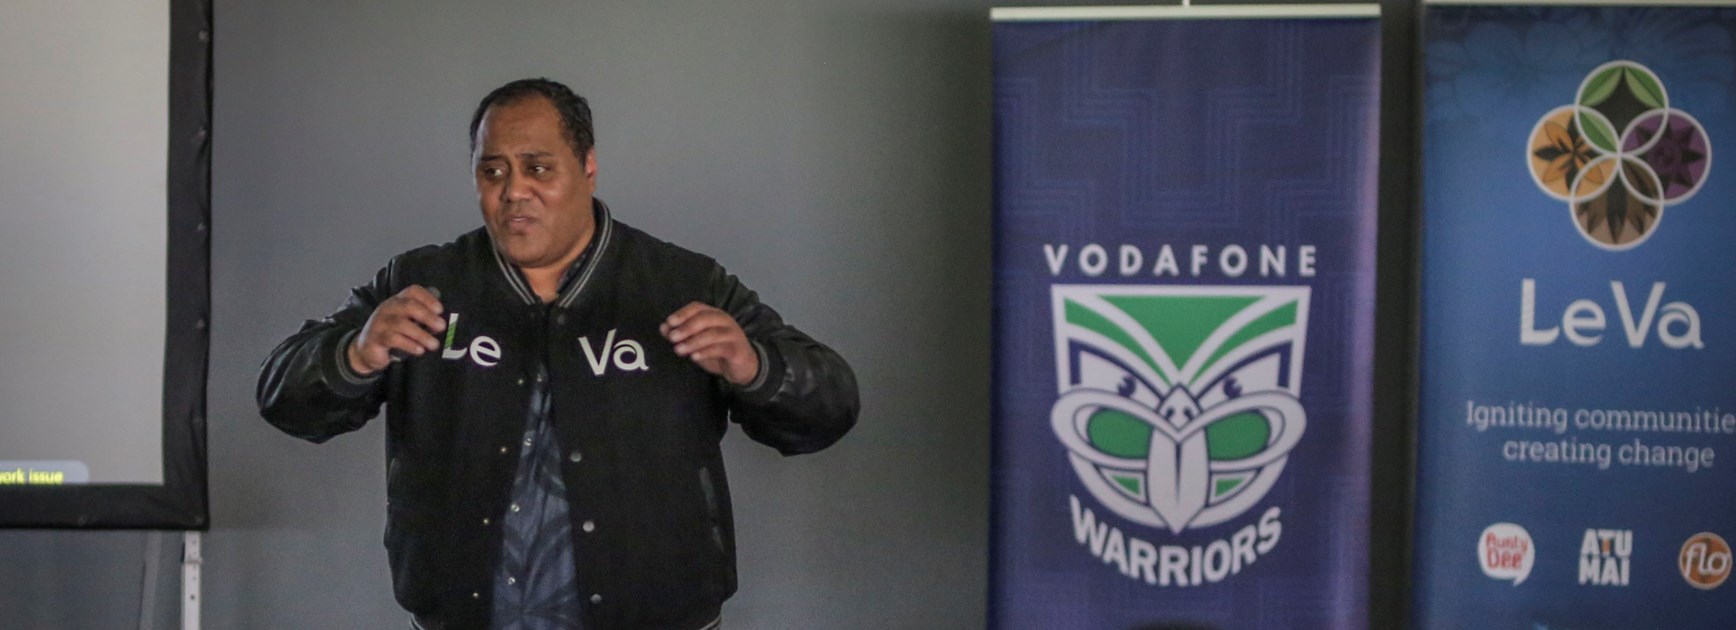 Vodafone Warriors and Le Va reaching out to clubs